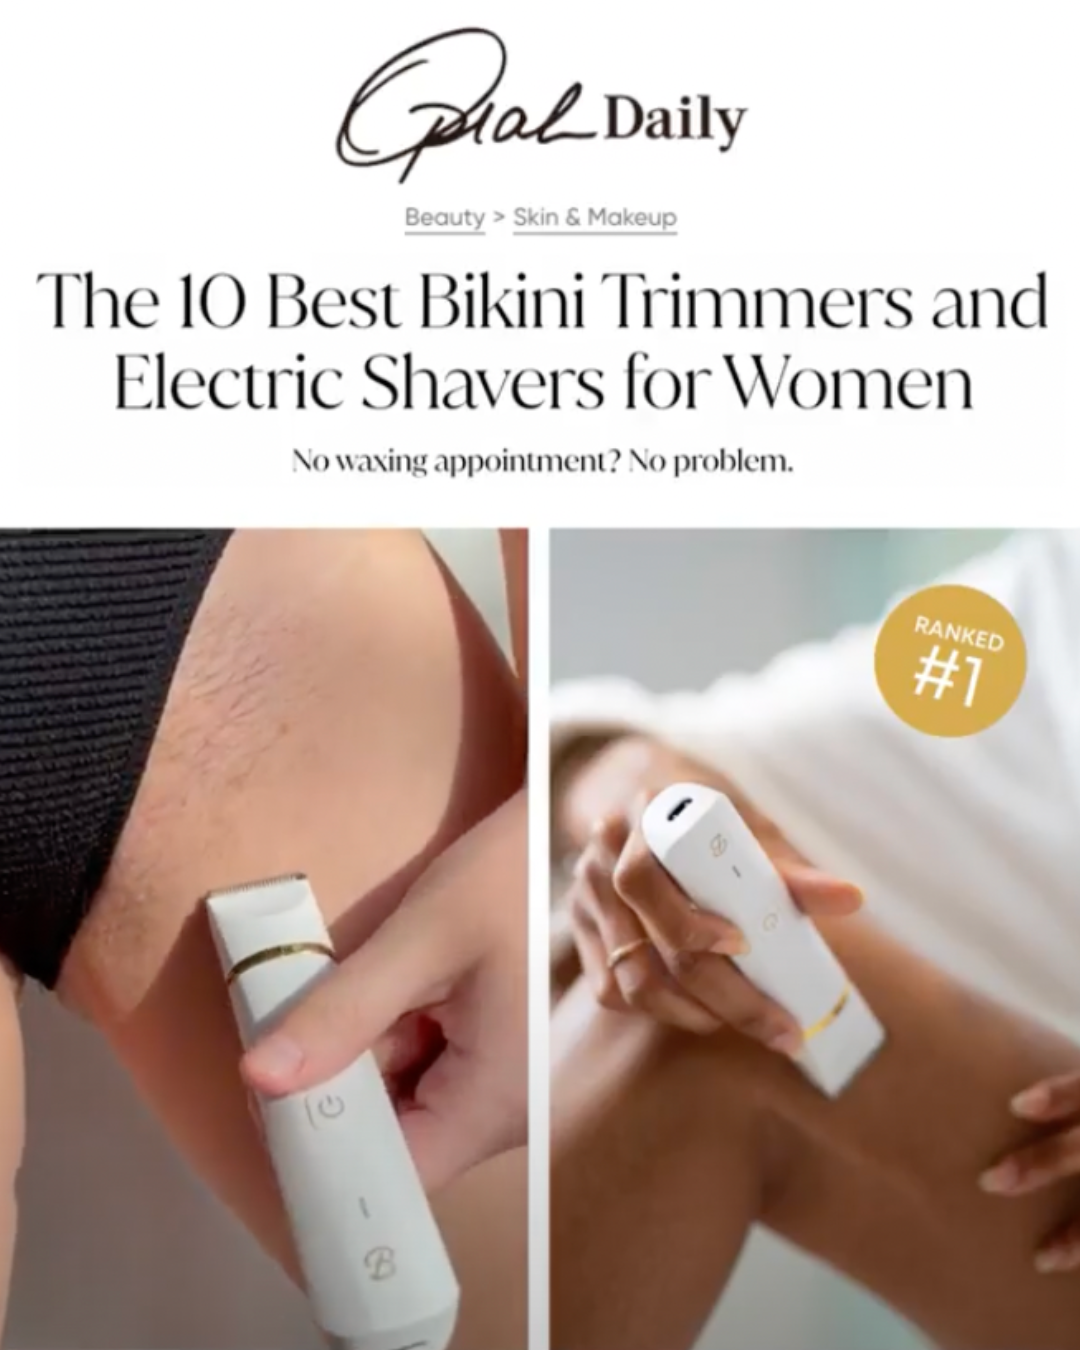 Oprah Daily Swears by This Bikini Trimmer—Here's Why It's Getting All the  Buzz